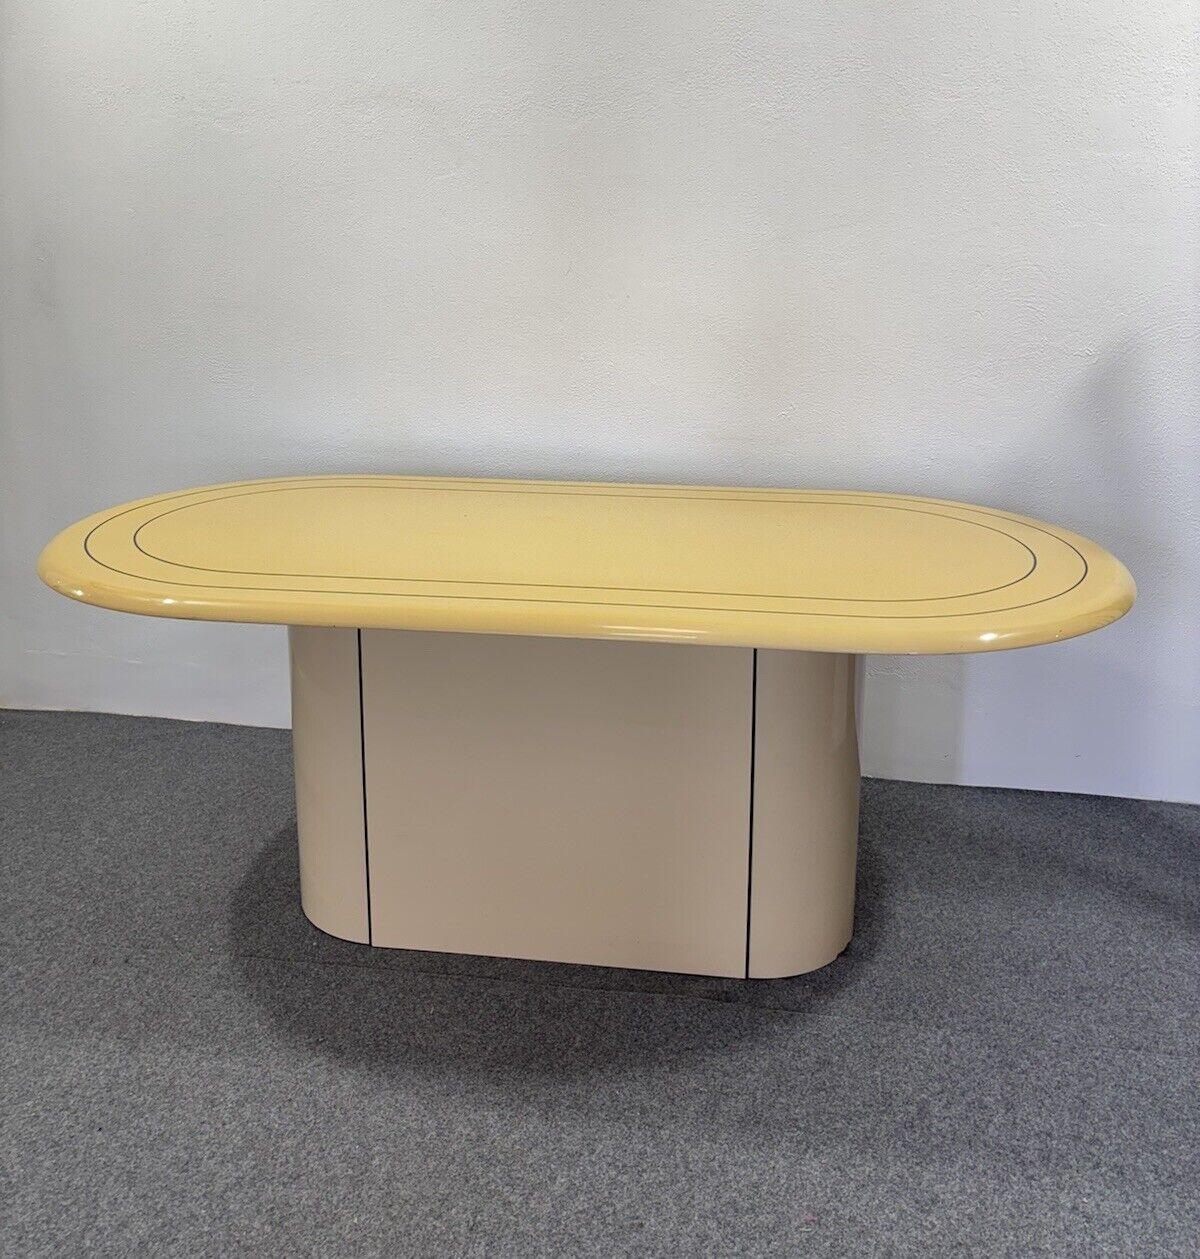 Pierre Cardin Style Dining Table Wooden Modern Design 1970s For Sale 5